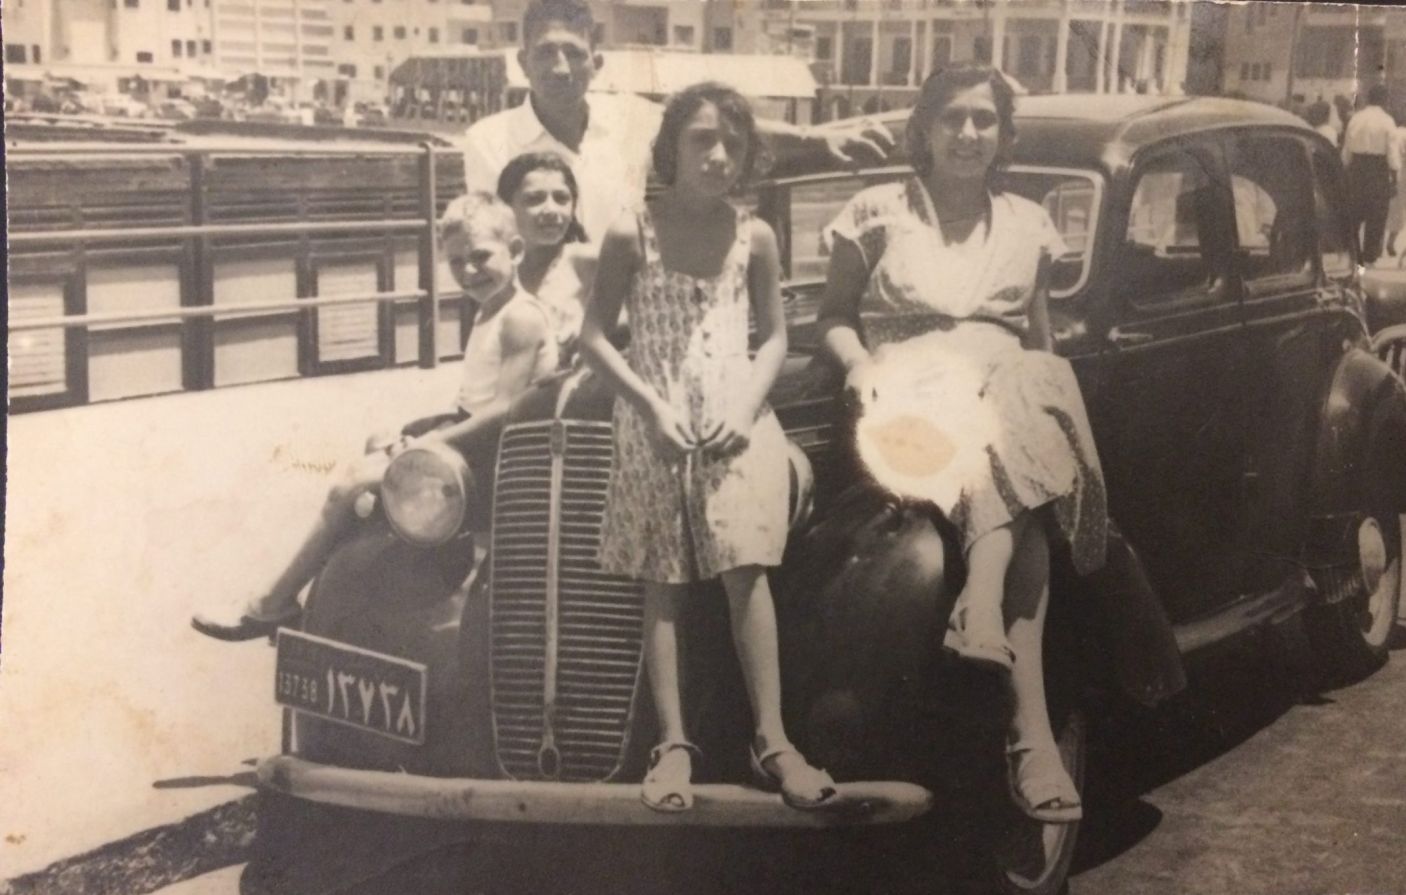 the Cohen-Saban family in Cairo, 1950s.